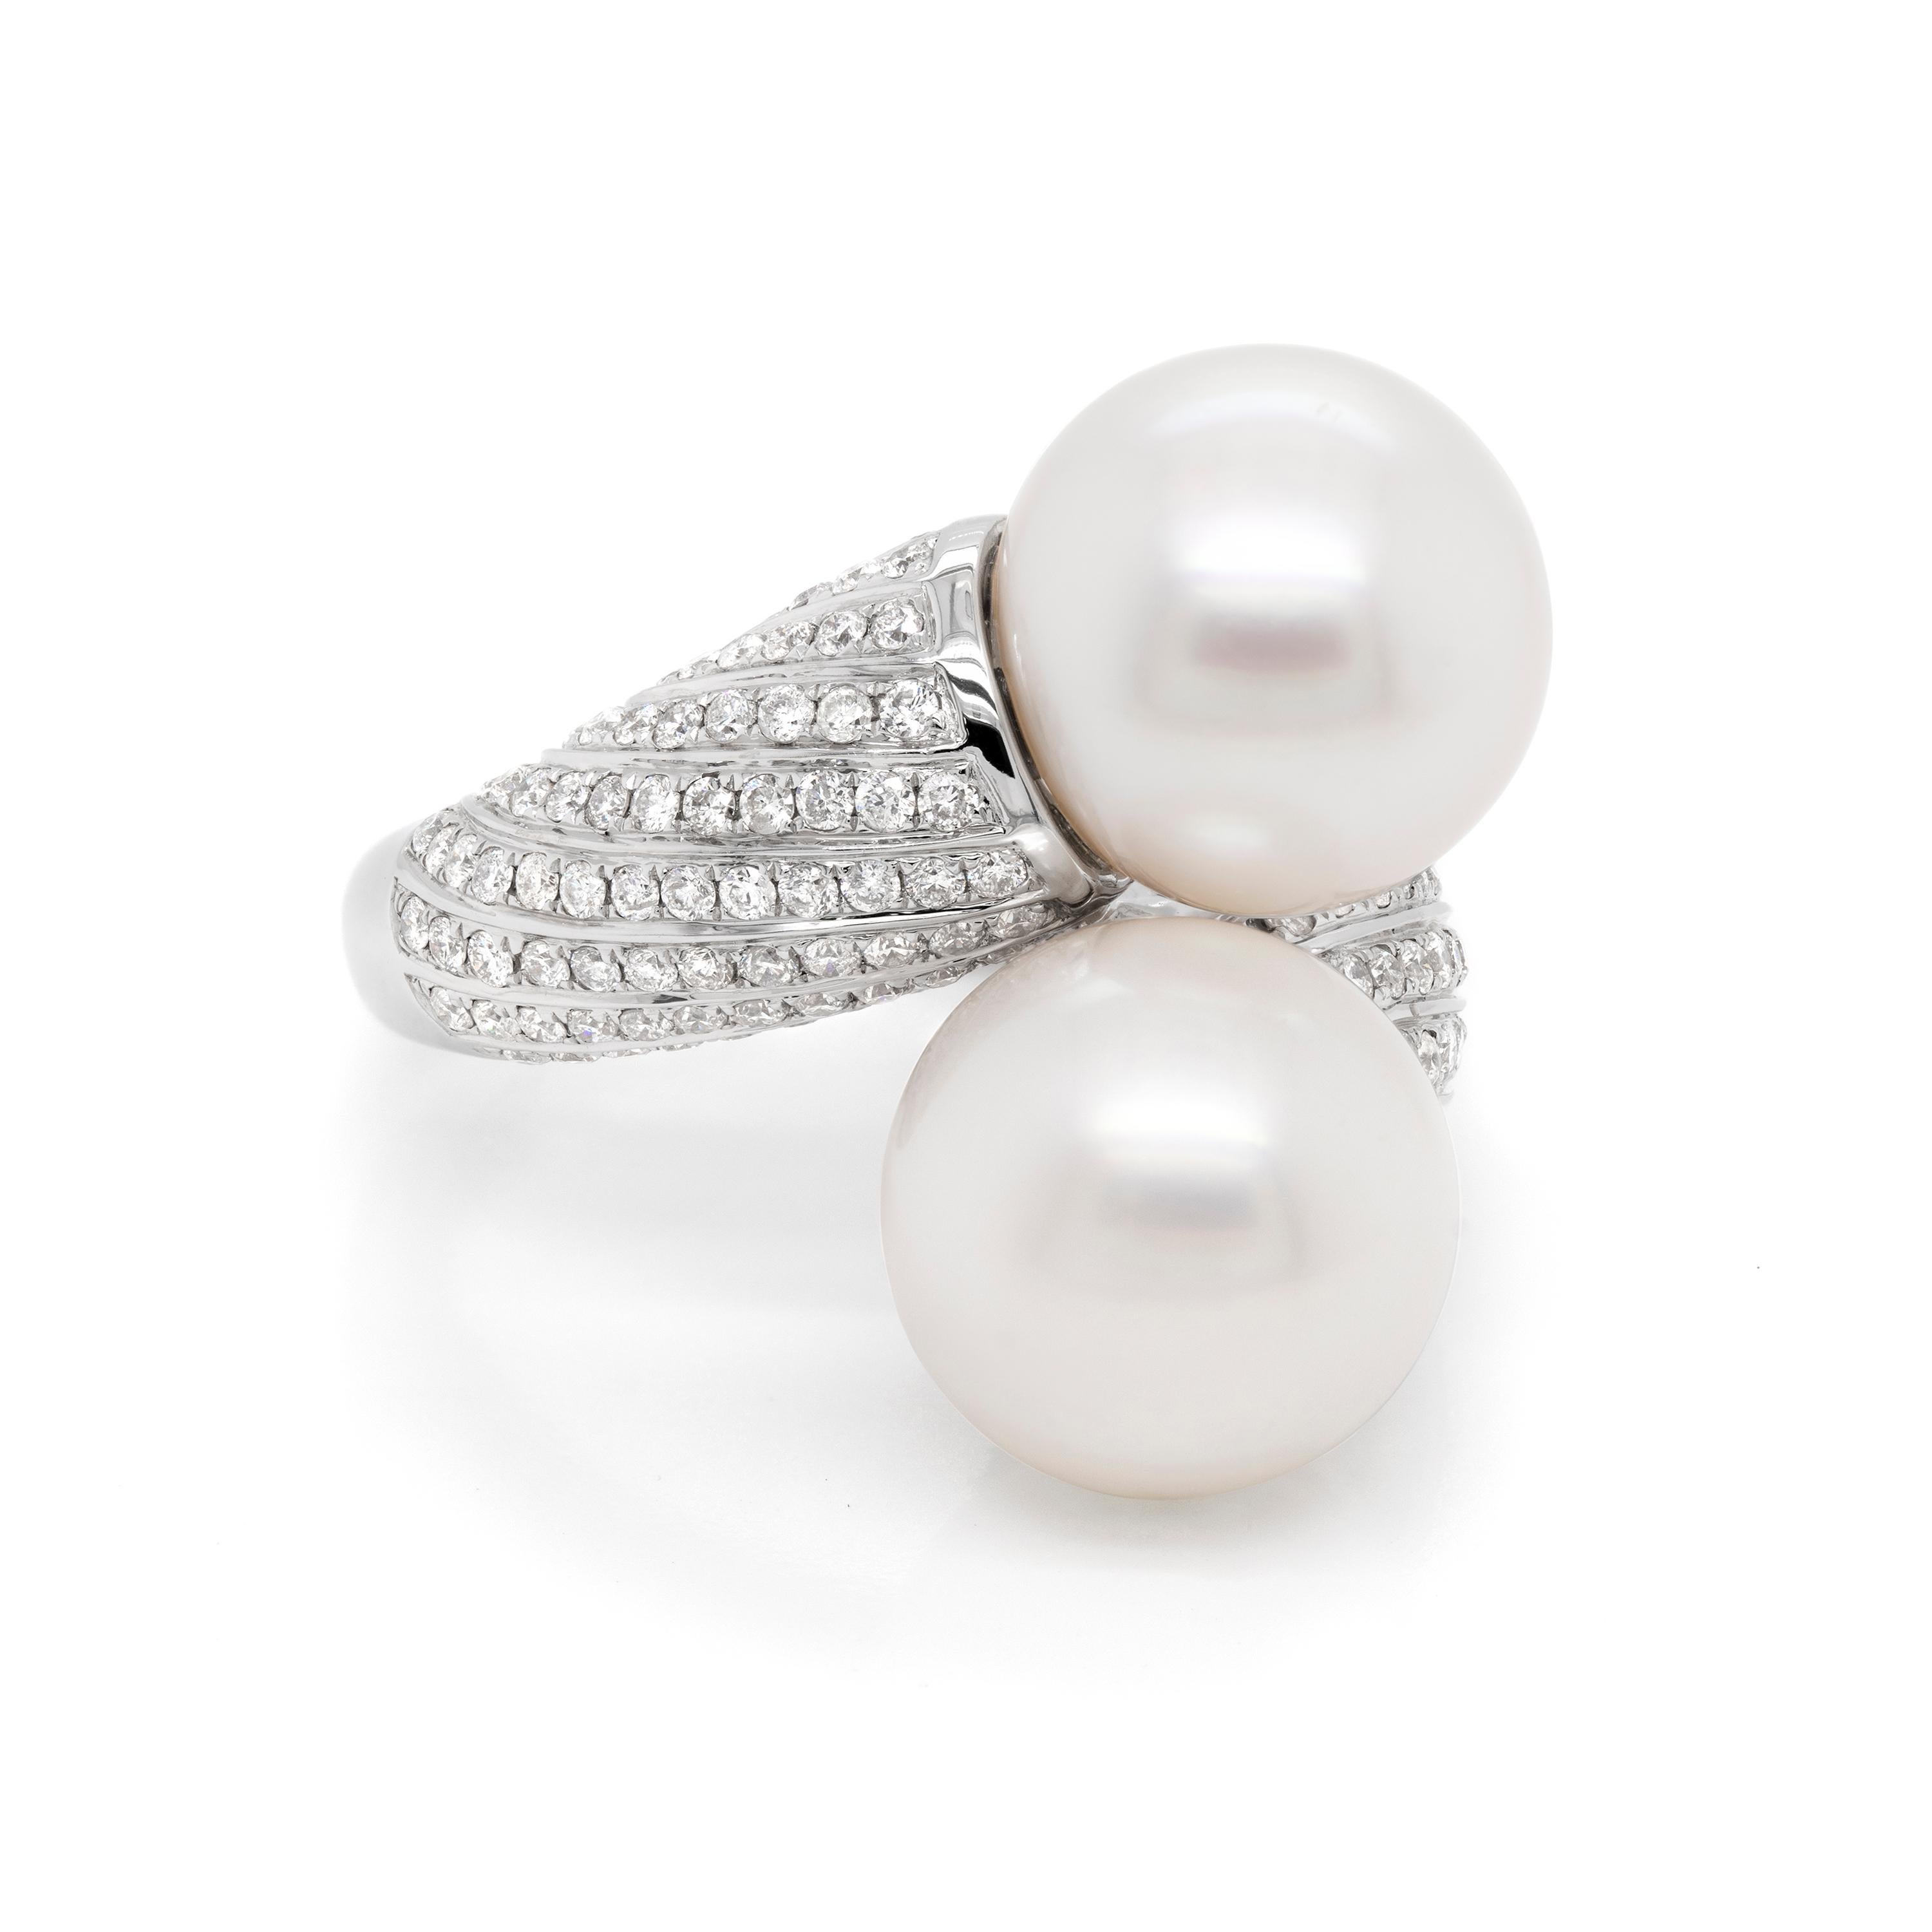 This impressive cocktail ring features two 13.2mm cultured pearls in the centre of a cross-over mount, pavè set with round brilliant cut diamonds with a total weight of 1.70 carats. The band graduates from 10.5mm to its finest point of 3.9mm. All